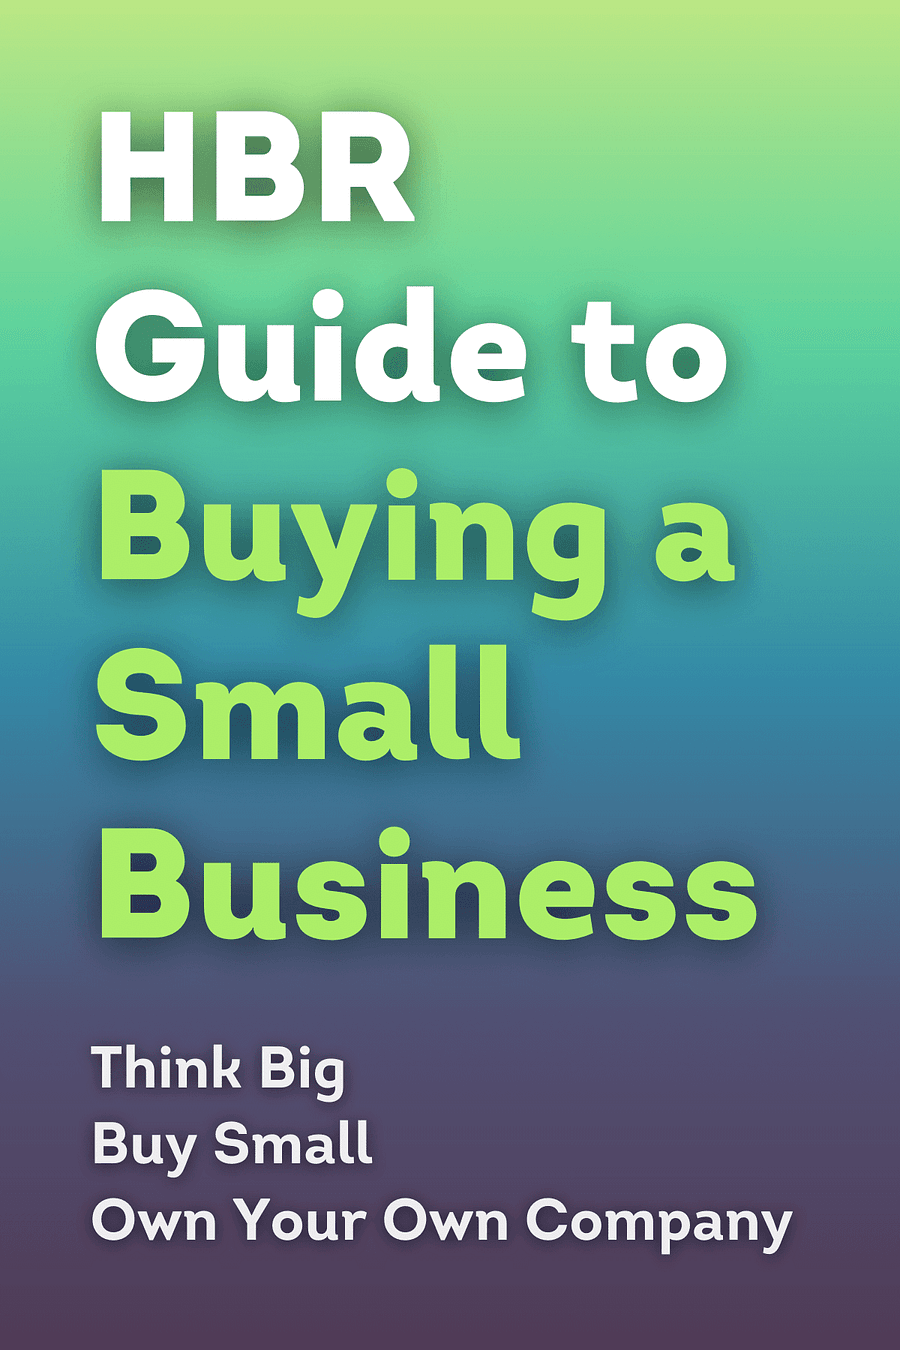 HBR Guide to Buying a Small Business by Richard S. Ruback, Royce Yudkoff - Book Summary